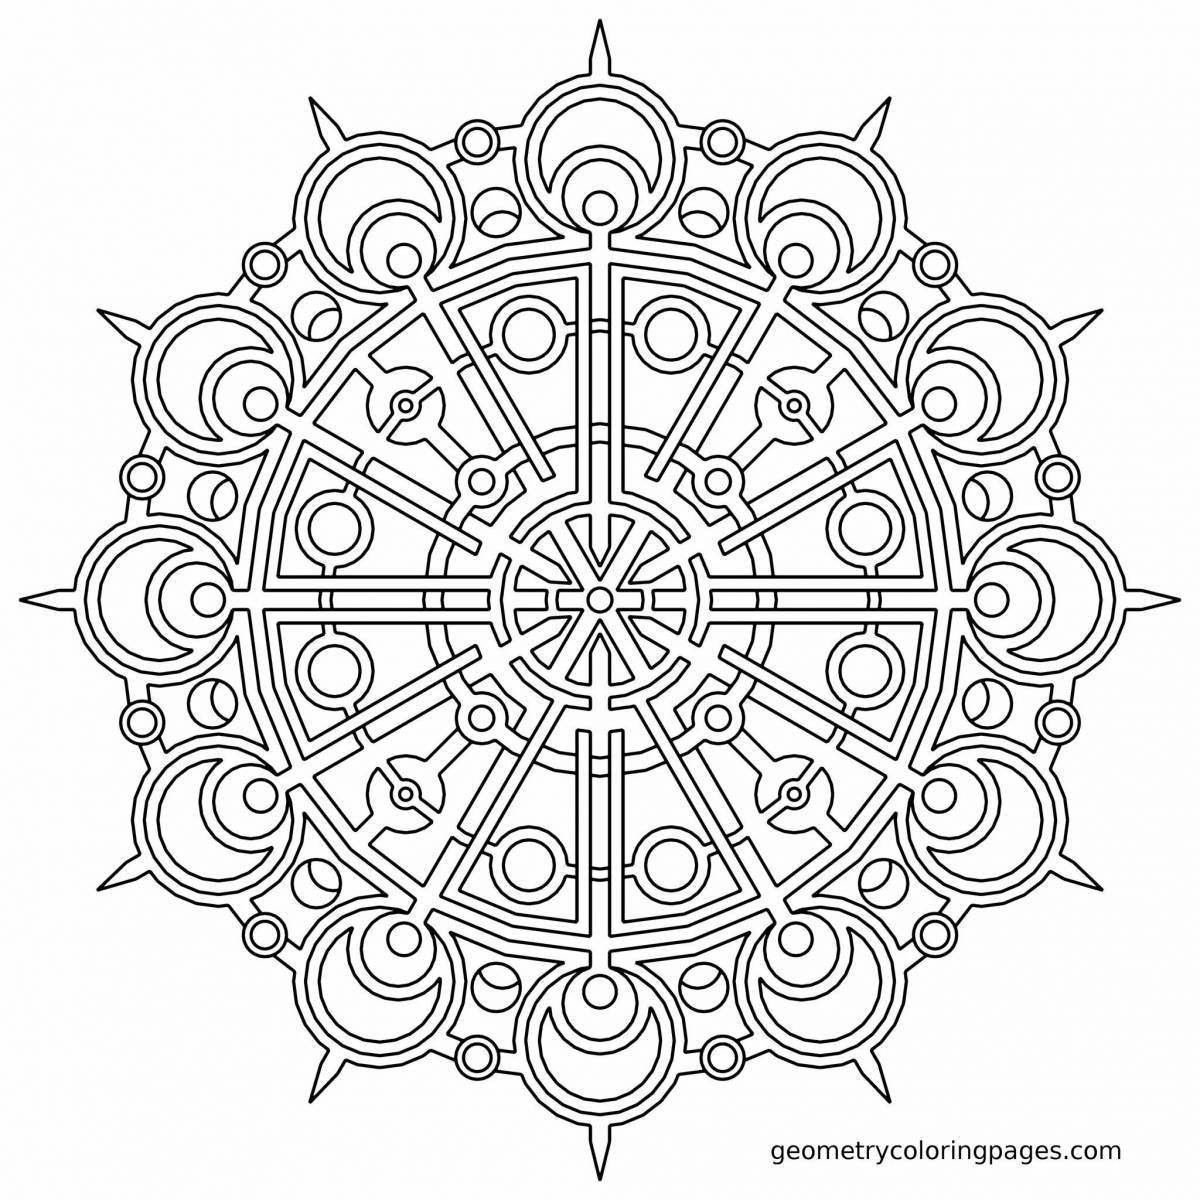 Bright coloring the meaning of the mandala